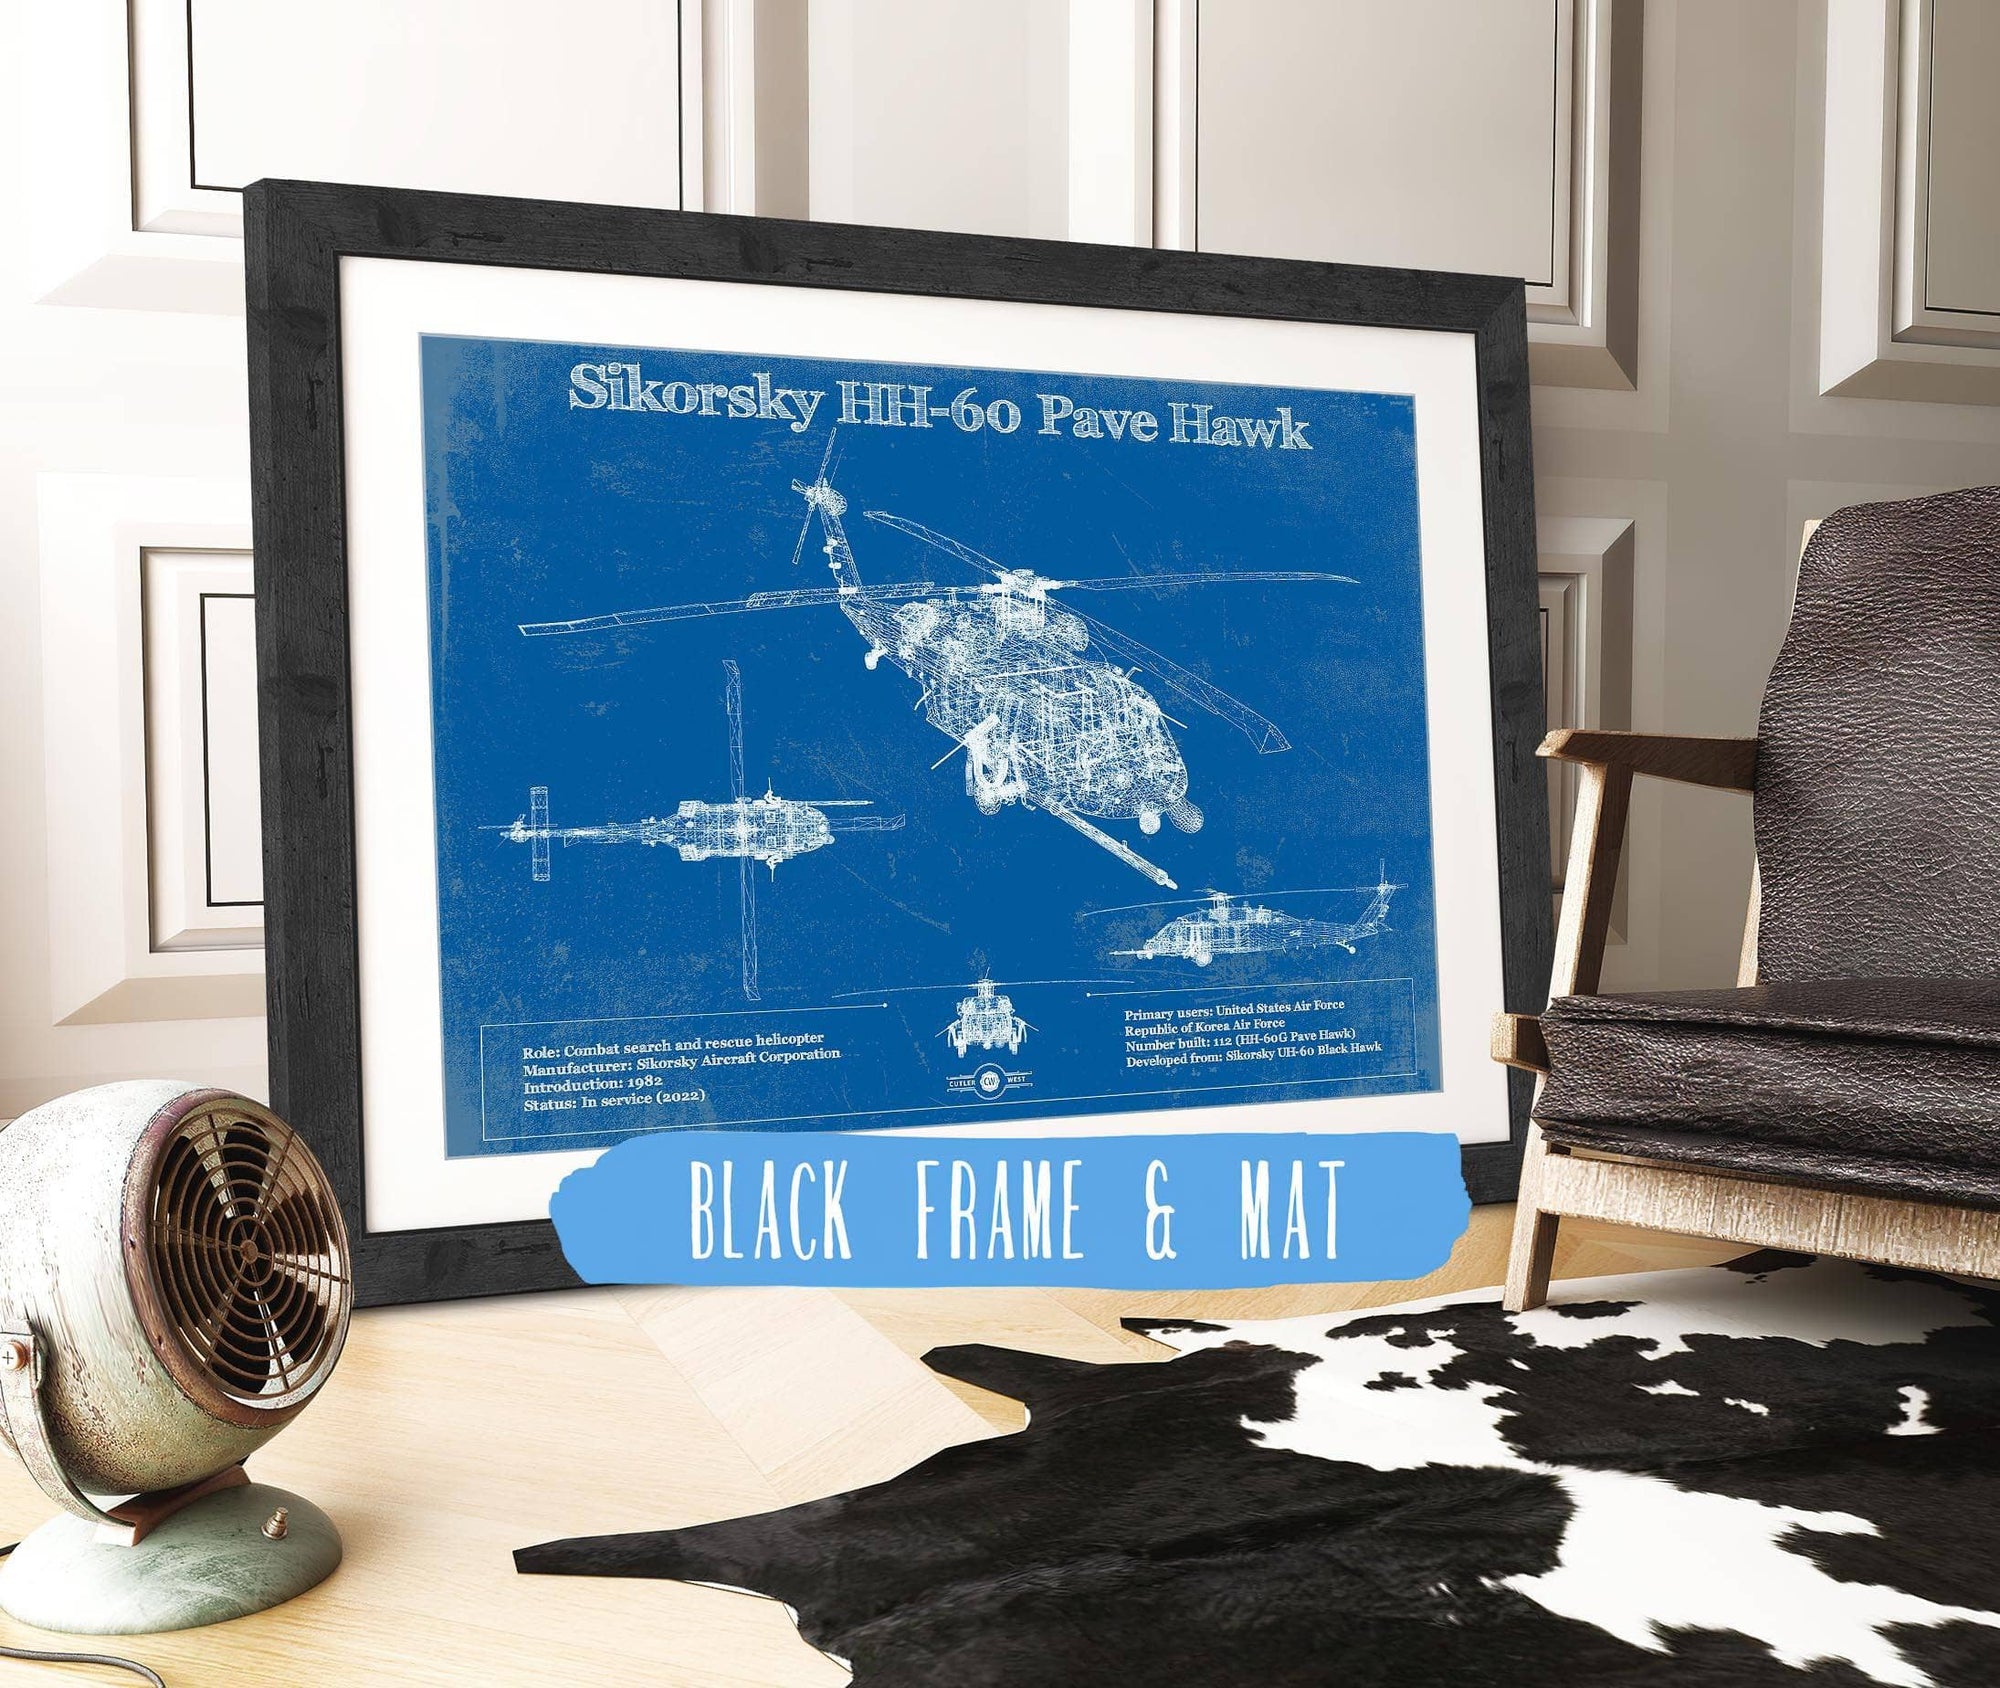 Cutler West Military Aircraft Sikorsky HH-60 Pave Hawk Vintage Aviation Blueprint Military Print